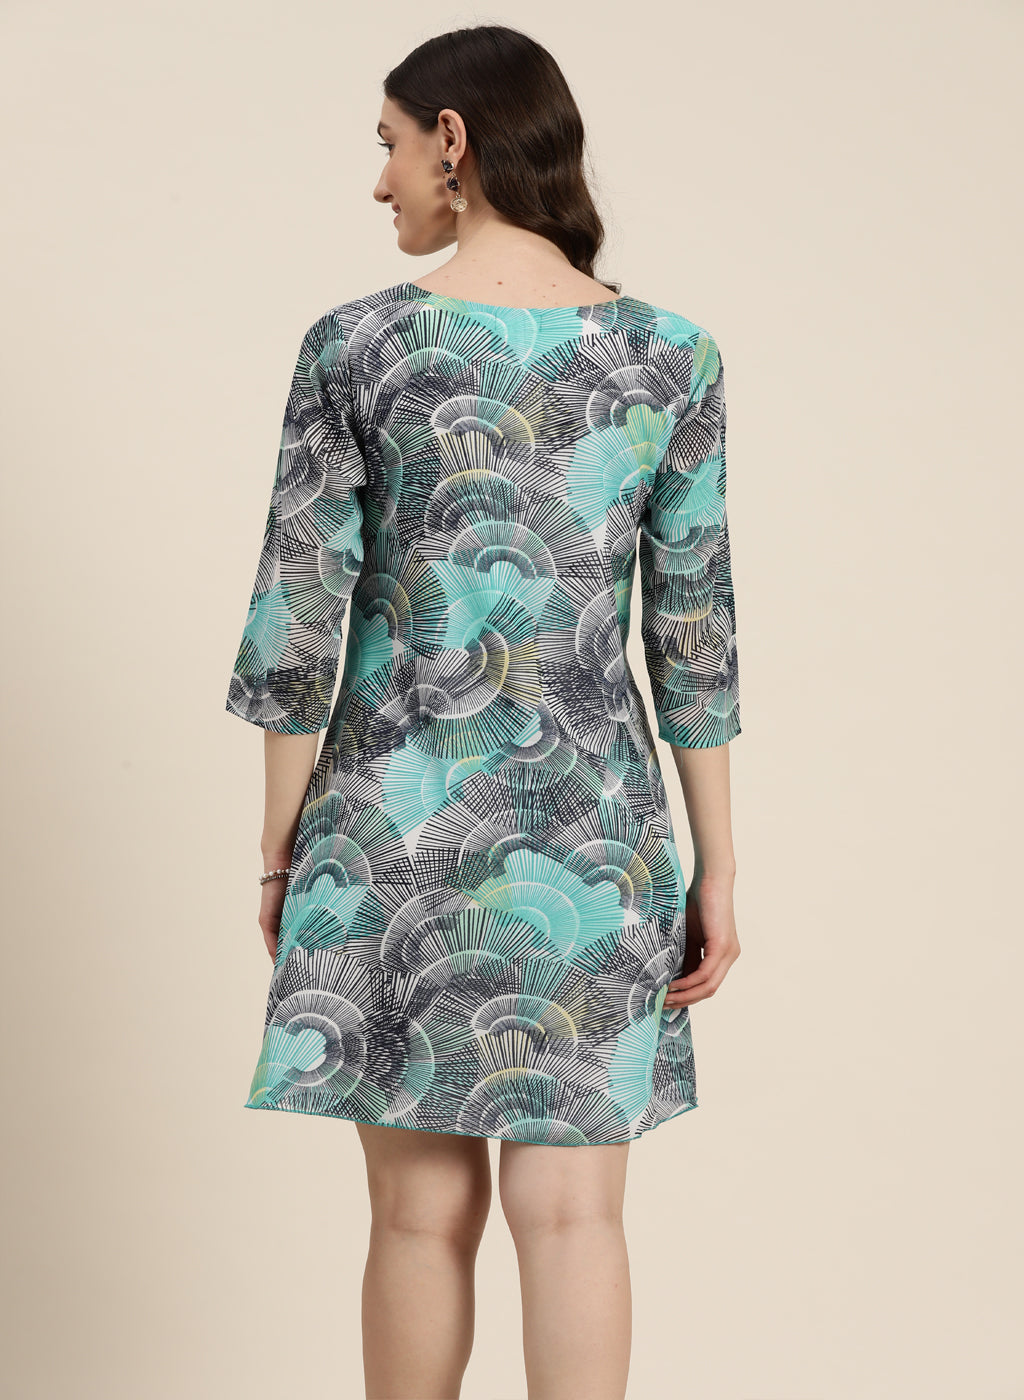 Turquoise abstract print dress